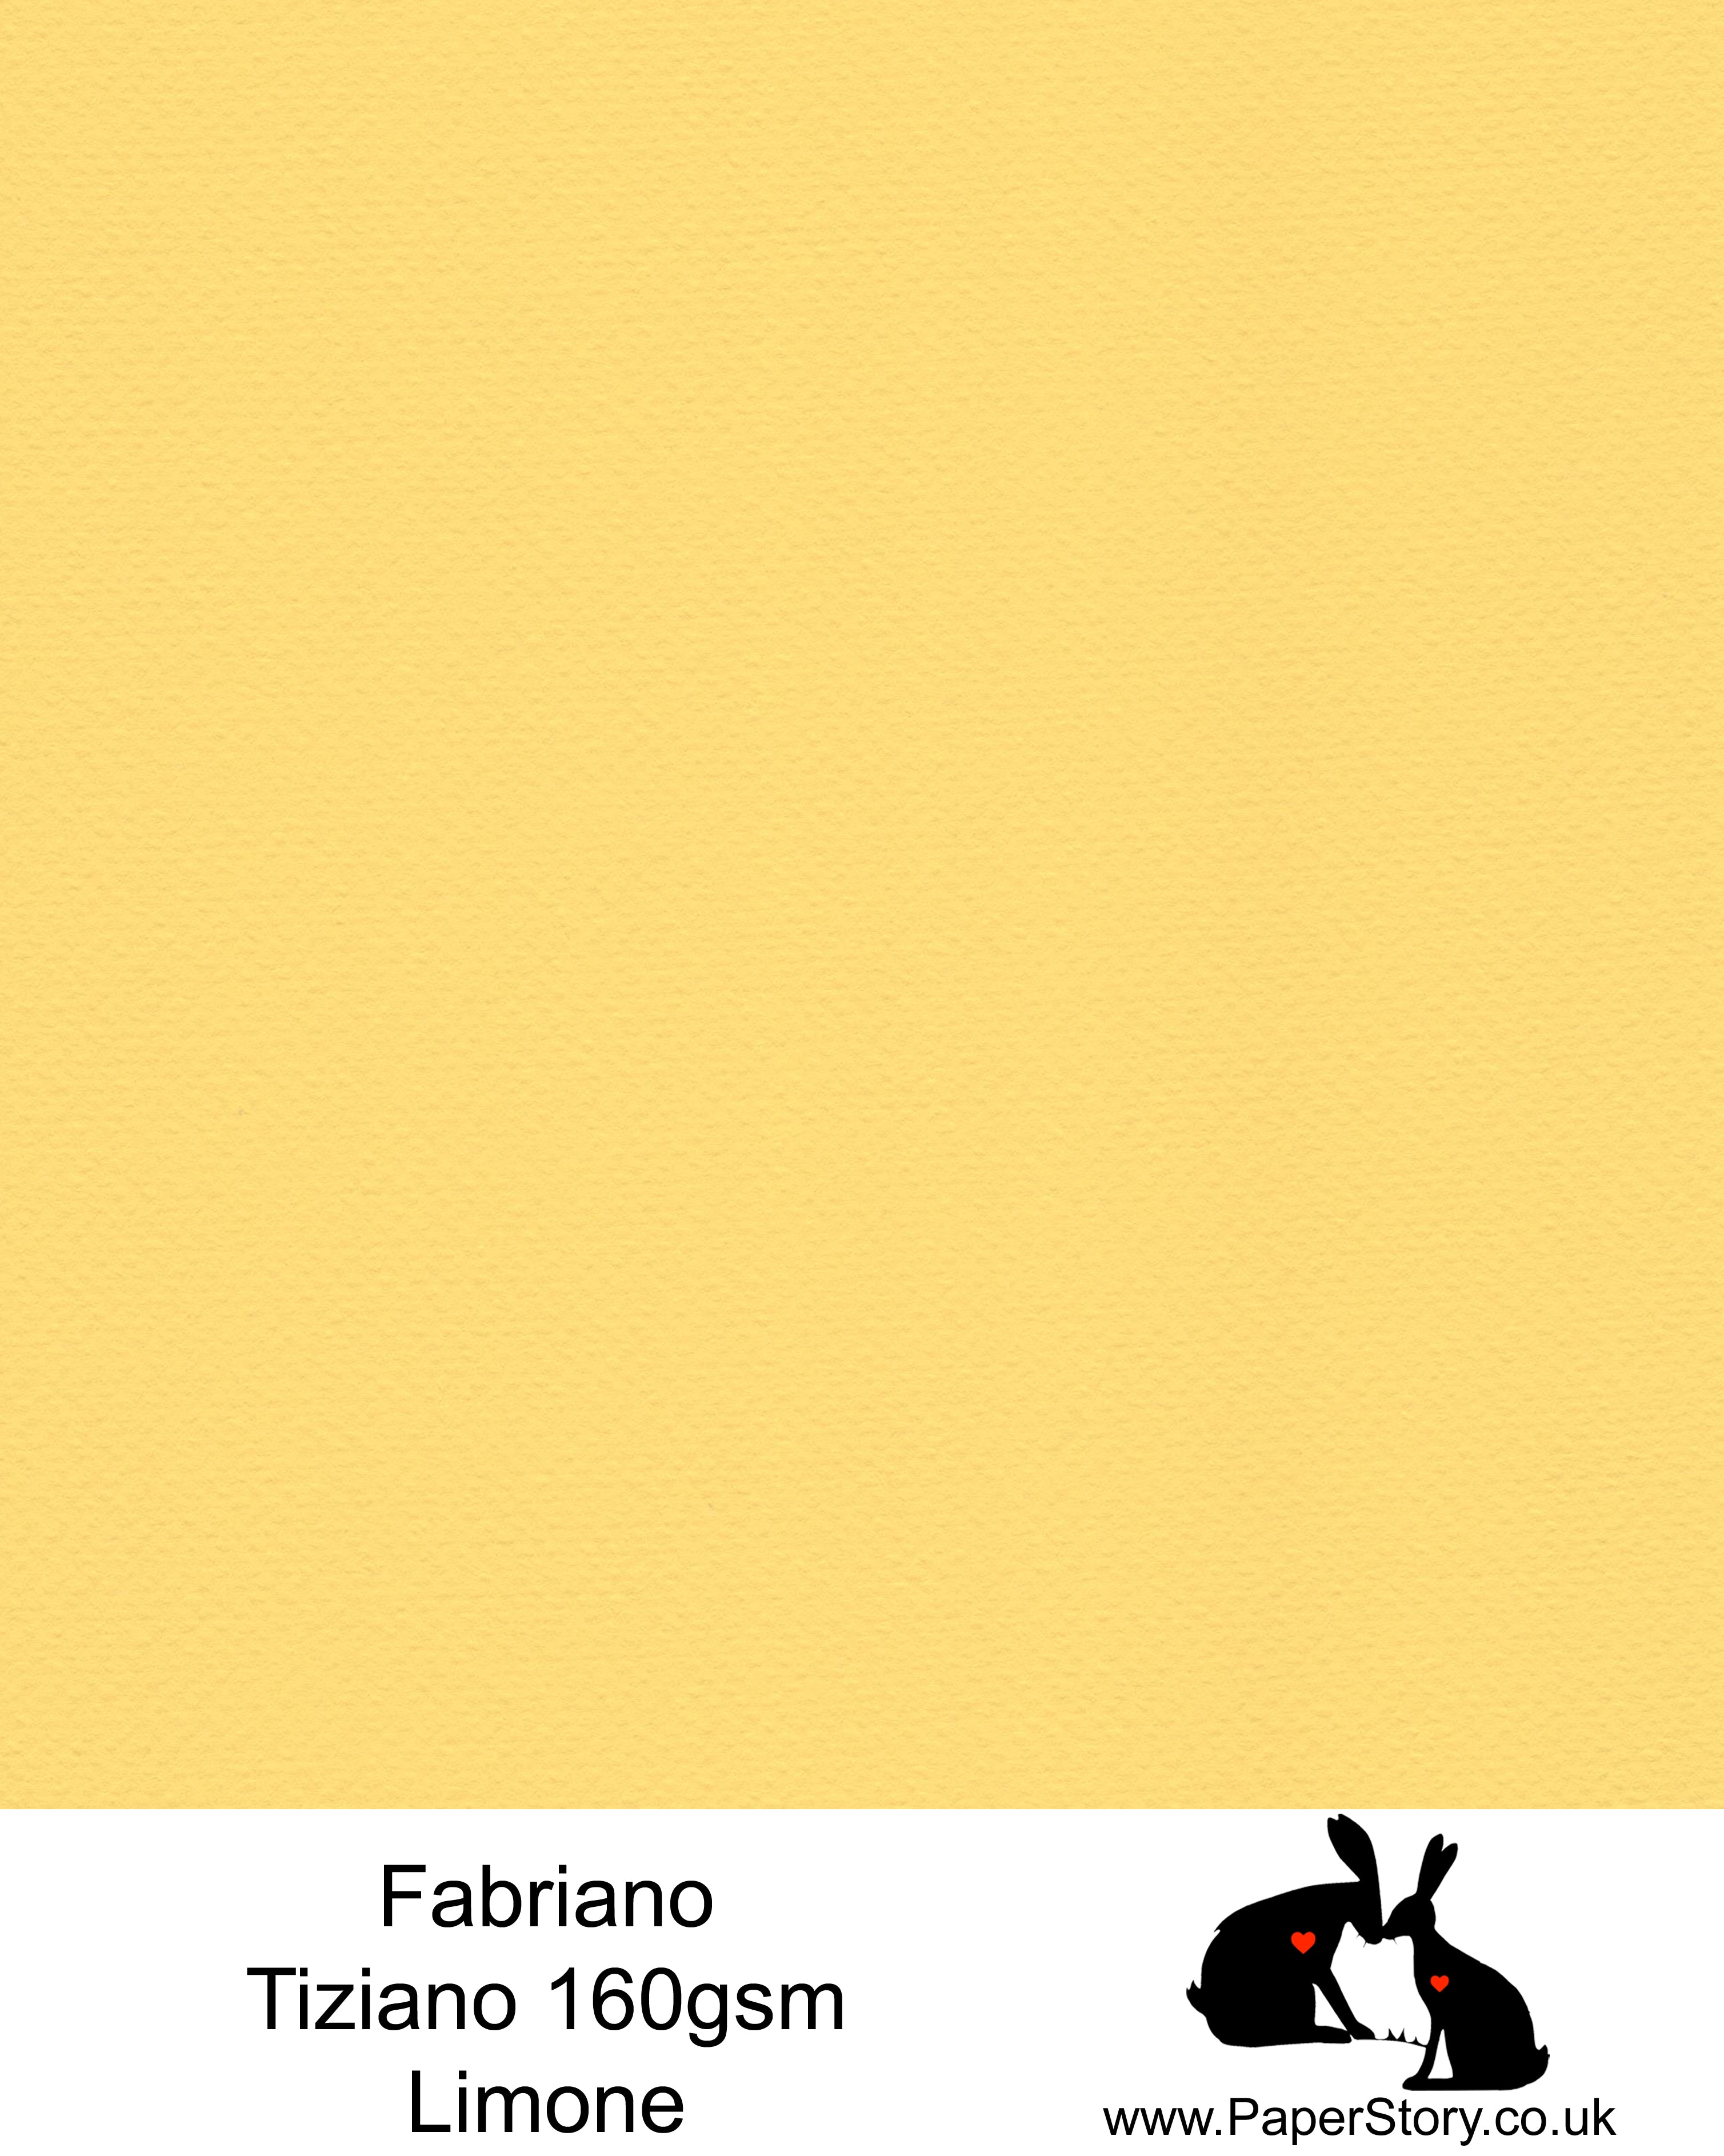 High quality paper from Italy, Limone, stunning bright yellow. Fabriano Tiziano is 160 gsm, Tiziano has a high cotton content, a textured naturally sized surface. This paper is acid free to guarantee long permanence in time, pH neutral. It has highly lightfast colours, an excellent surface making and sizing which make this paper particularly suitable for papercutting, pastels, pencil, graphite, charcoal, tempera, air brush and watercolour techniques. Tiziano can be used for all printing techniques.